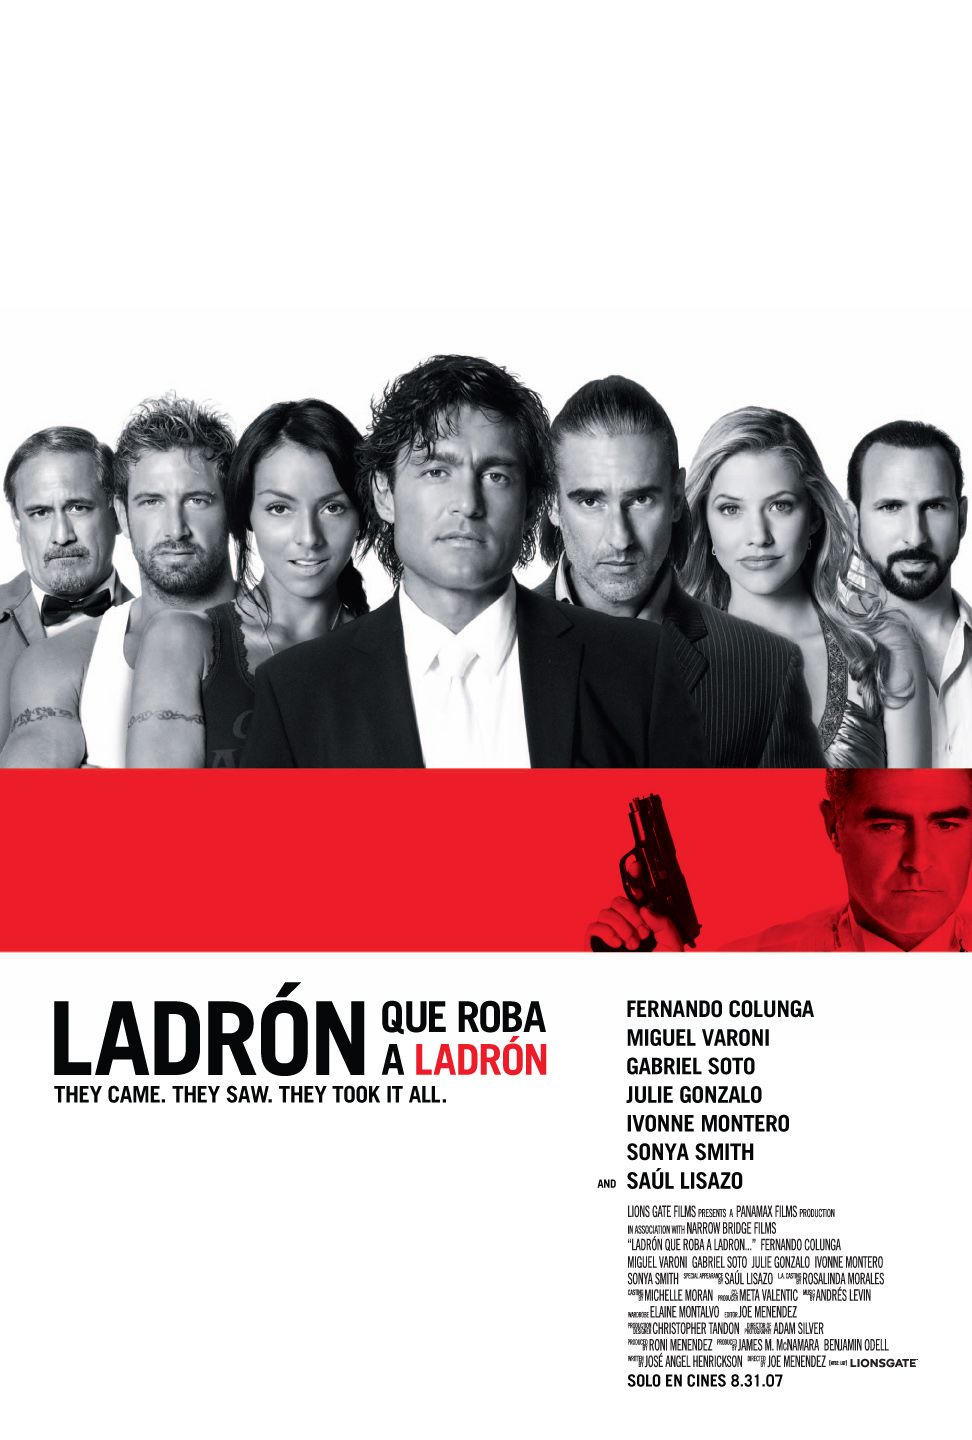 Extra Large Movie Poster Image for Ladron que roba a ladron 